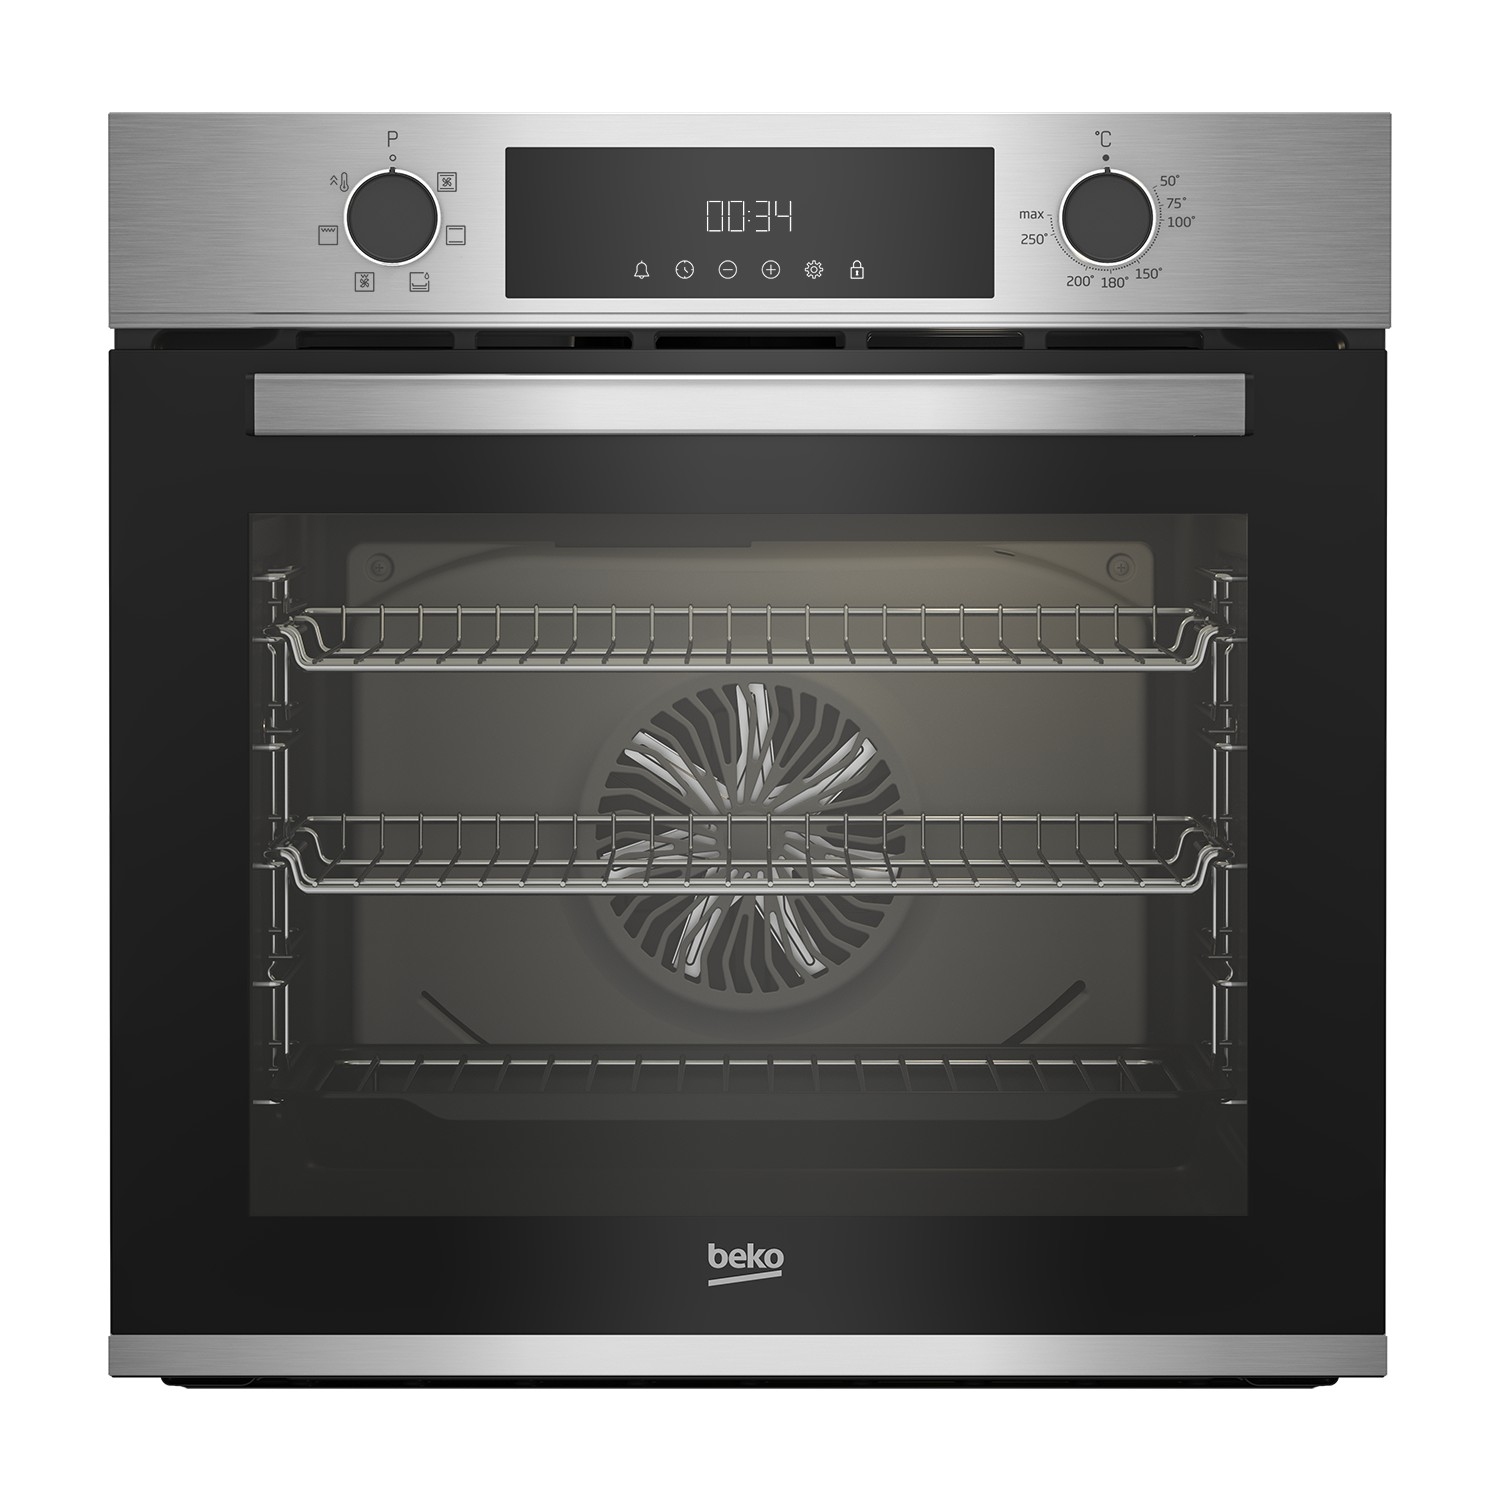 Beko AeroPerfect&trade; CIMY91X 60cm Built In RecycledNet&trade; Single Multi- function Oven - Stainless Steel - 0